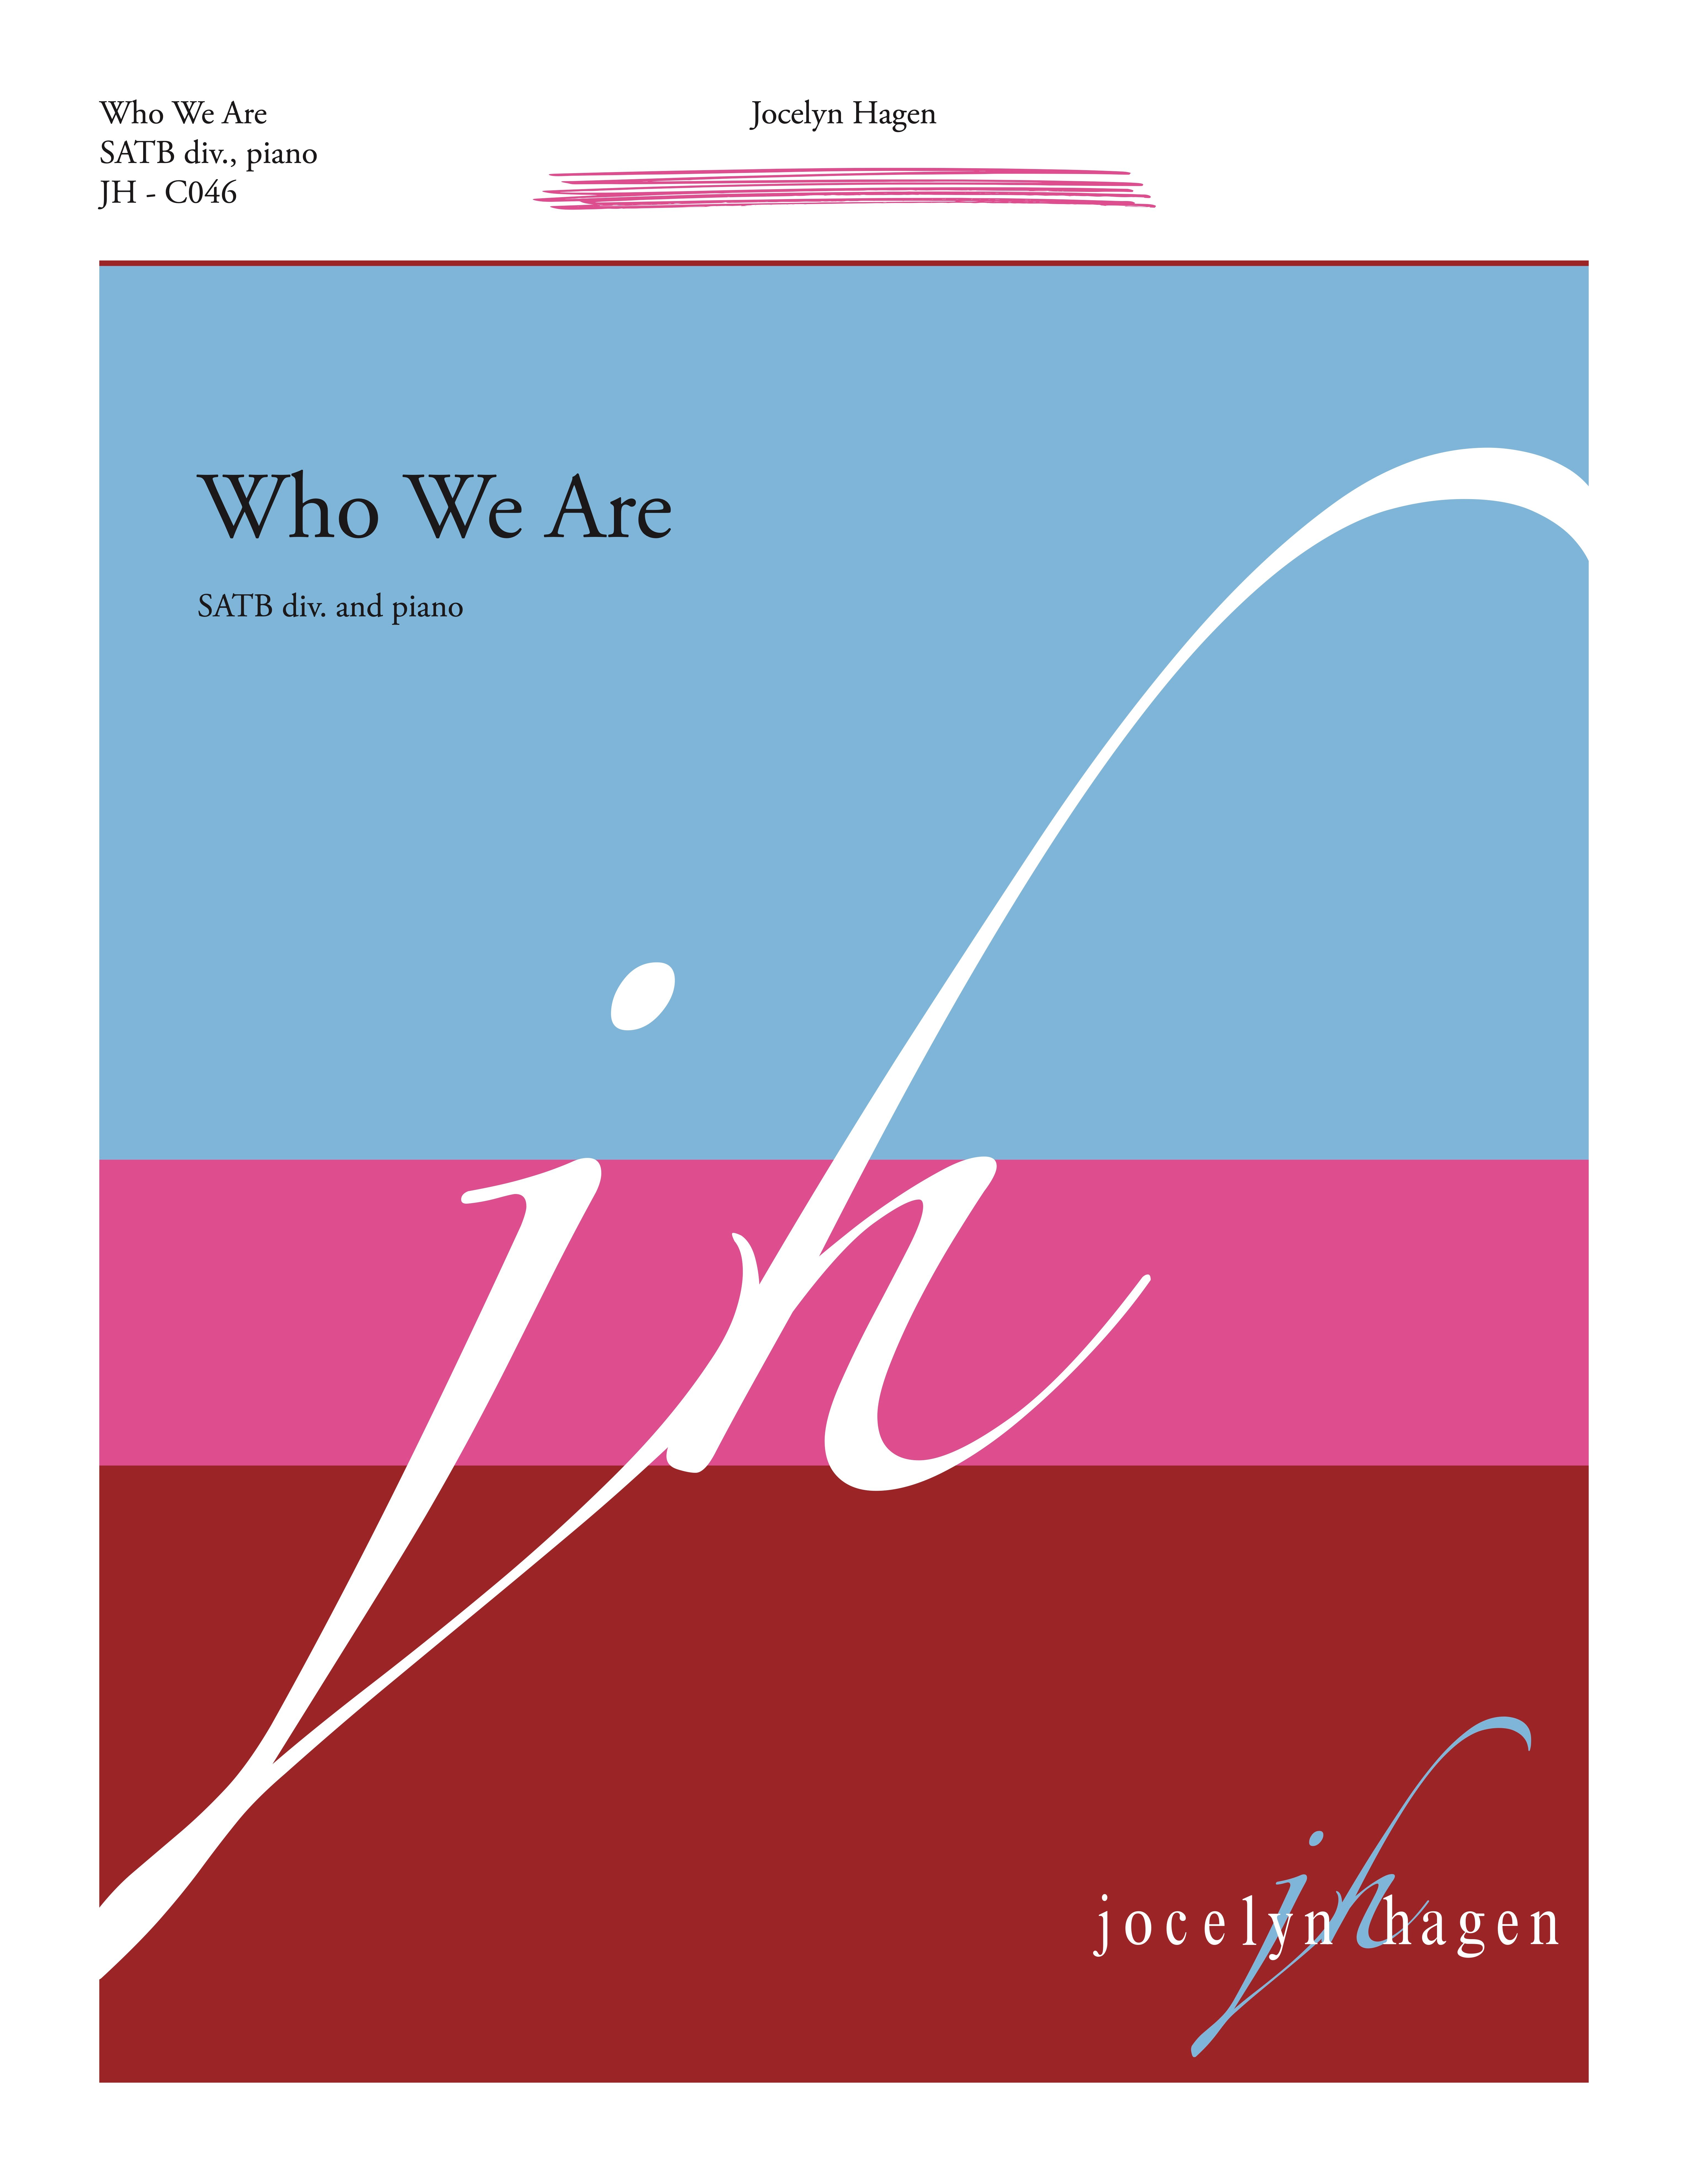 Who We Are community sheet music cover